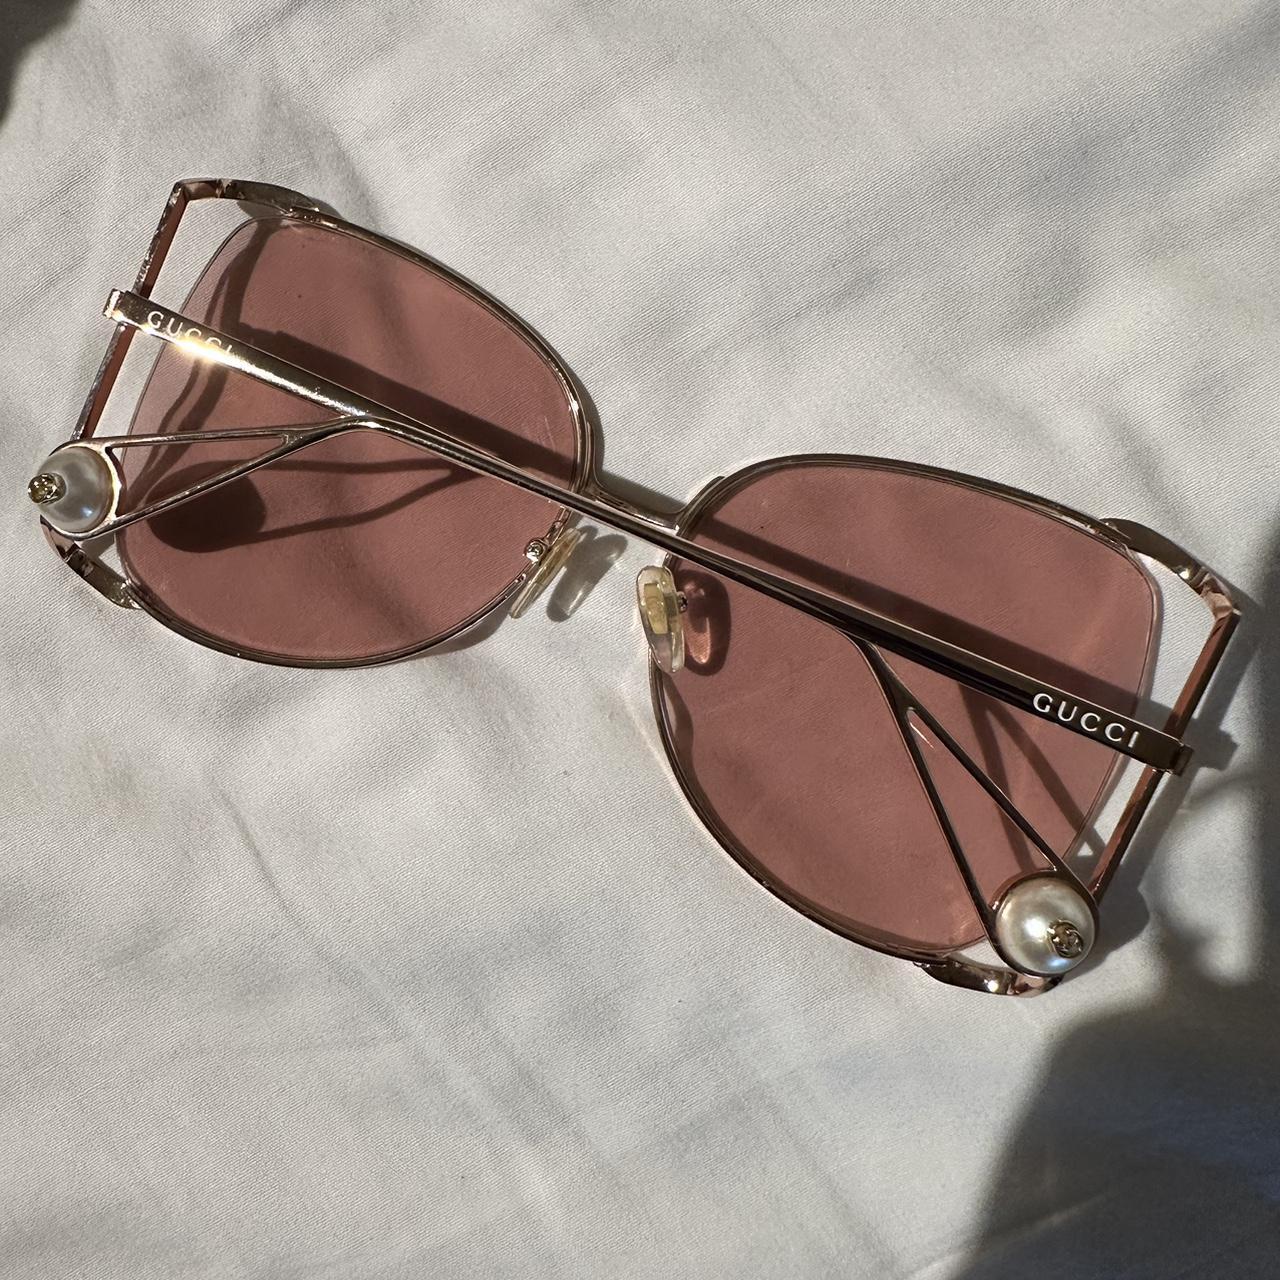 Gucci Women's Pink and Gold Sunglasses (2)